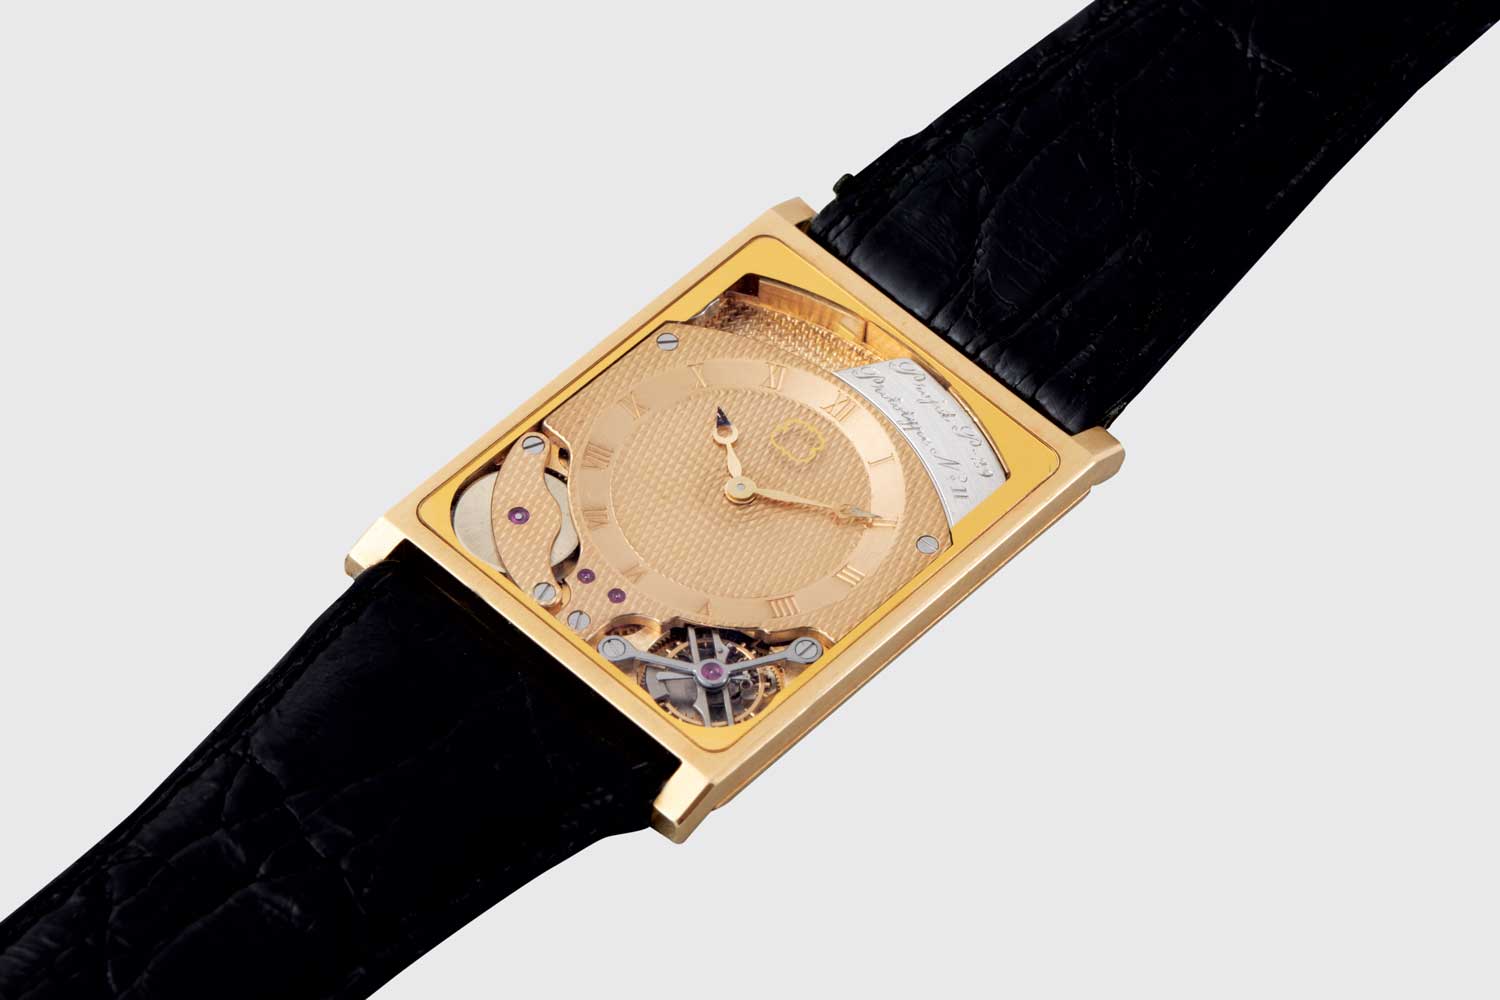 With this prototype, Beyner and Grimm succeeded in pushing watchmaking’s boundaries, producing the world’s first automatic-winding, ultra-thin tourbillon. At only 2.7mm thick they established a record by integrating the movement with the case back (Picture courtesy of Phillips)